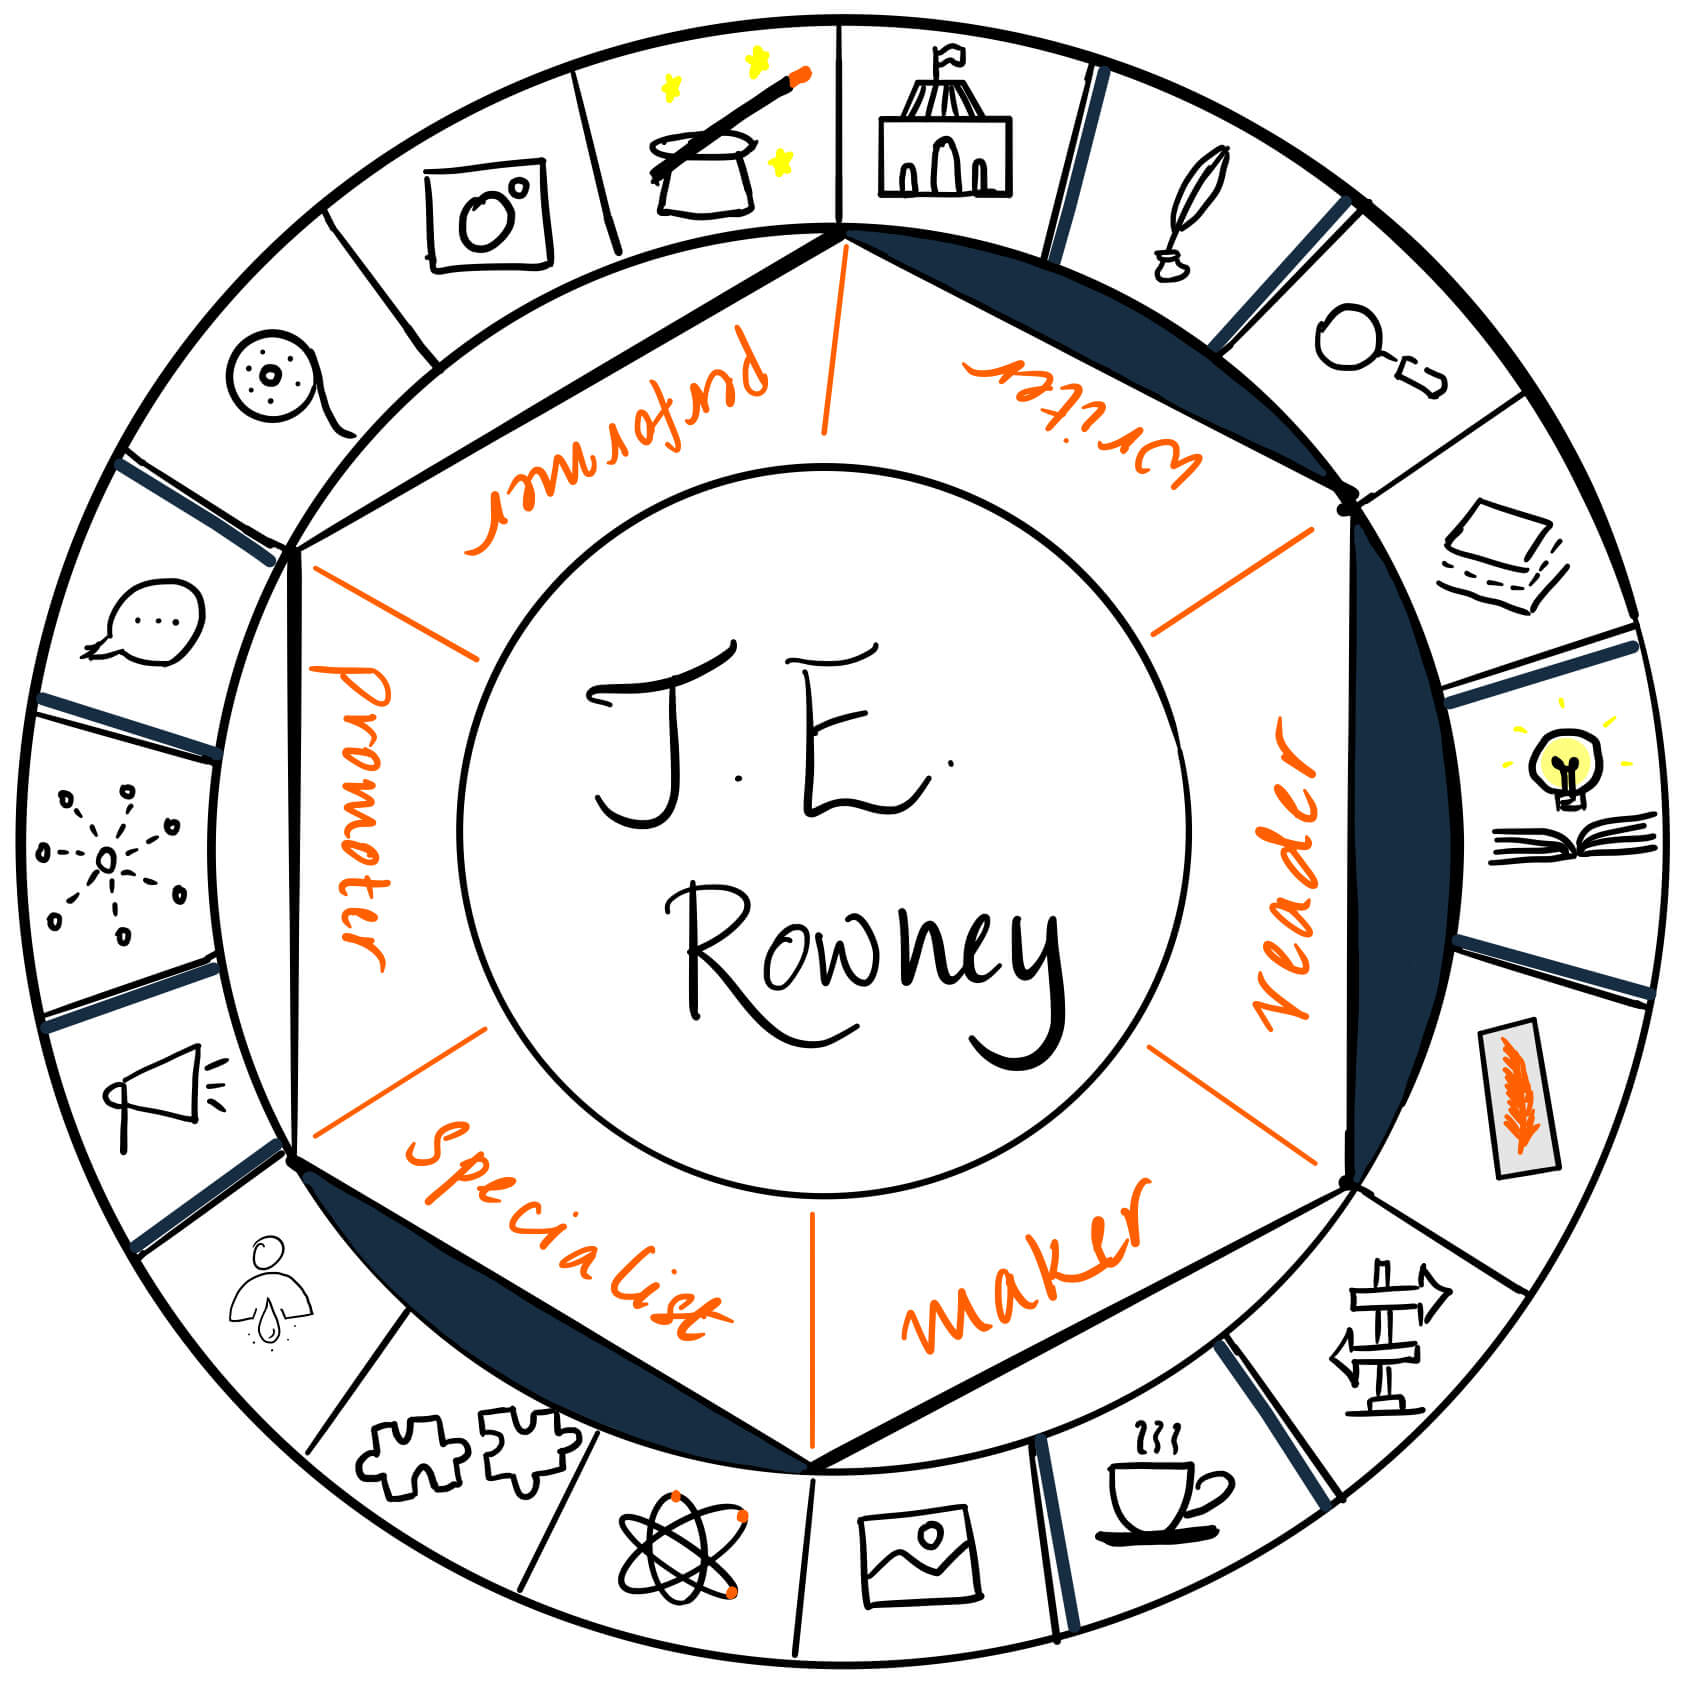 Jayne Rowney is a writer, reader and specialist. It's a pleasure to have her over on The Creator's Roulette and learn about the process of making an audiobook from a novel.